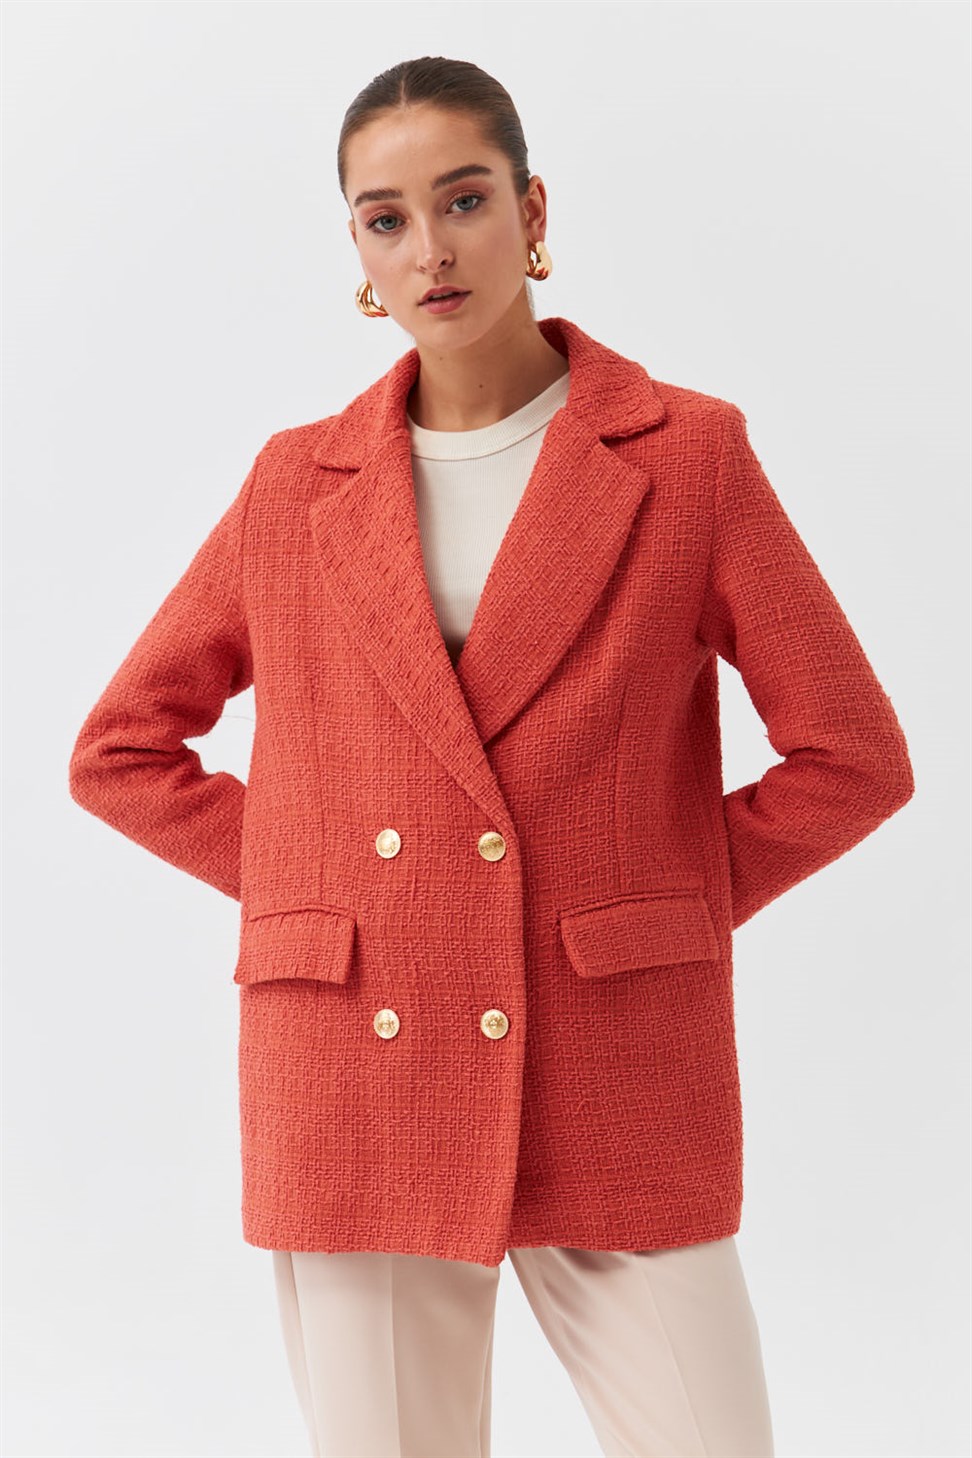 Modest Double Breasted Collar Tweed Orange Womens Jacket